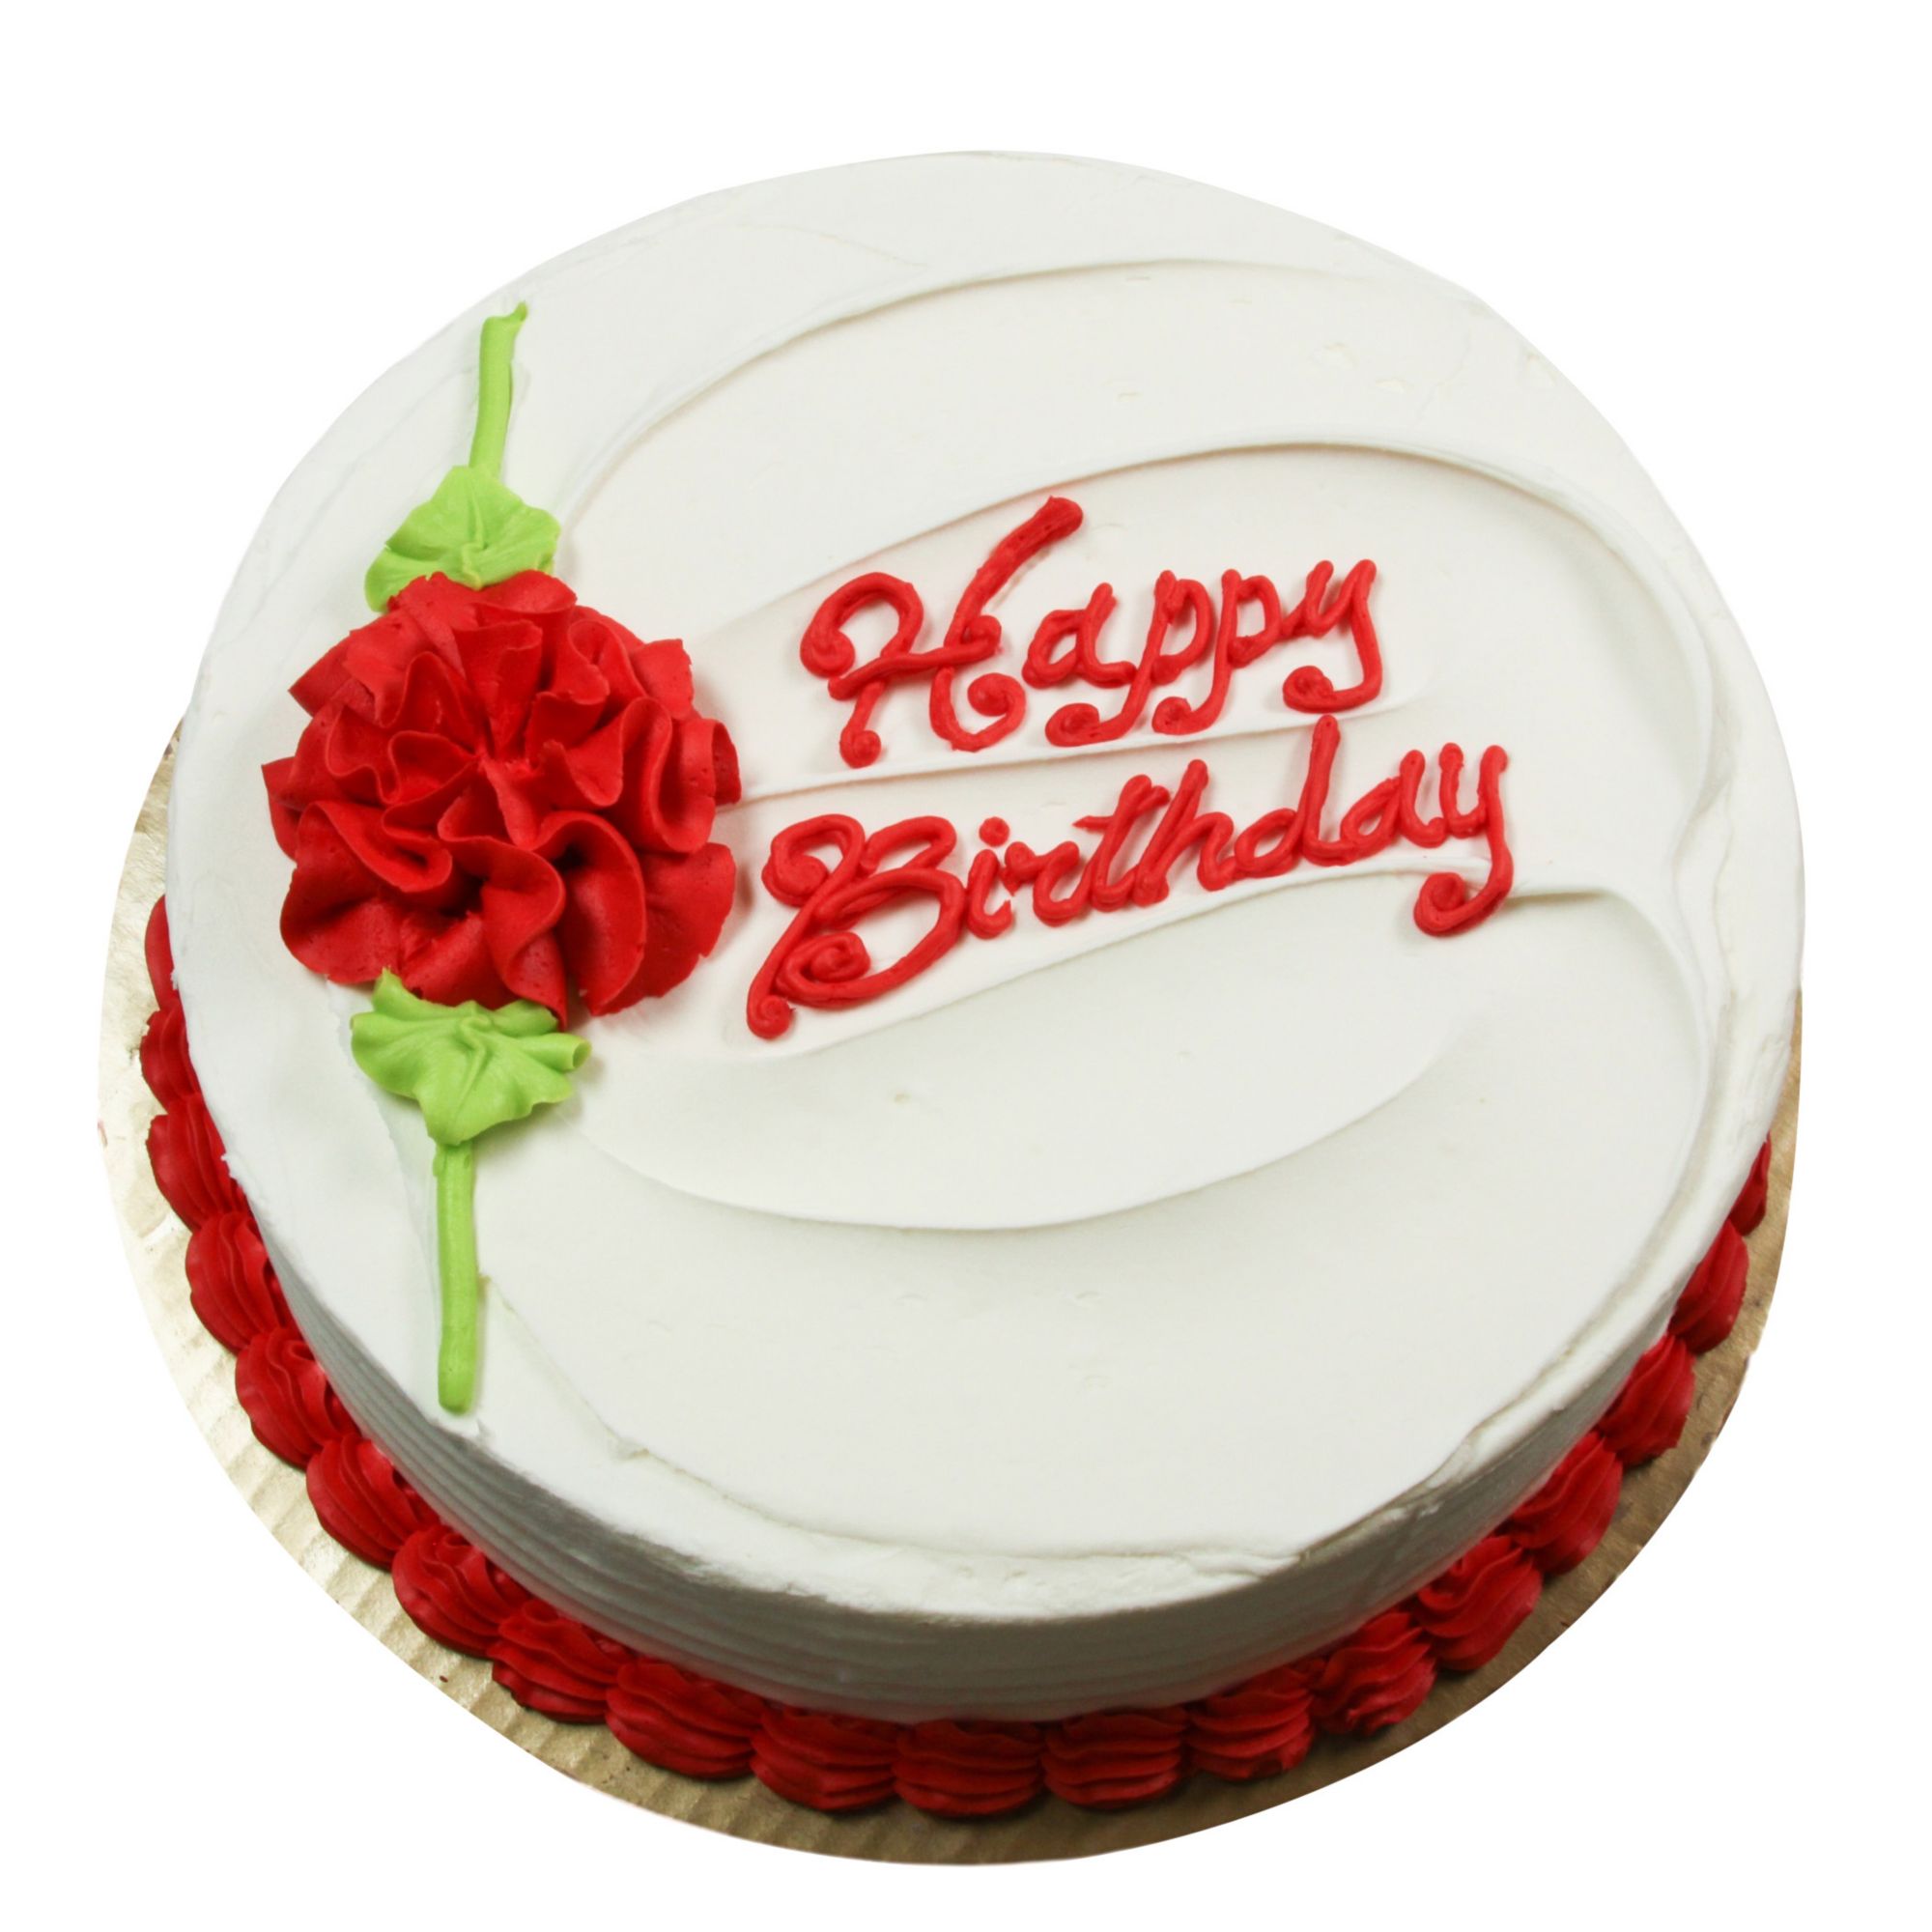 Wellsley Farms 10&quot; Gold Cake With Red Floral Design